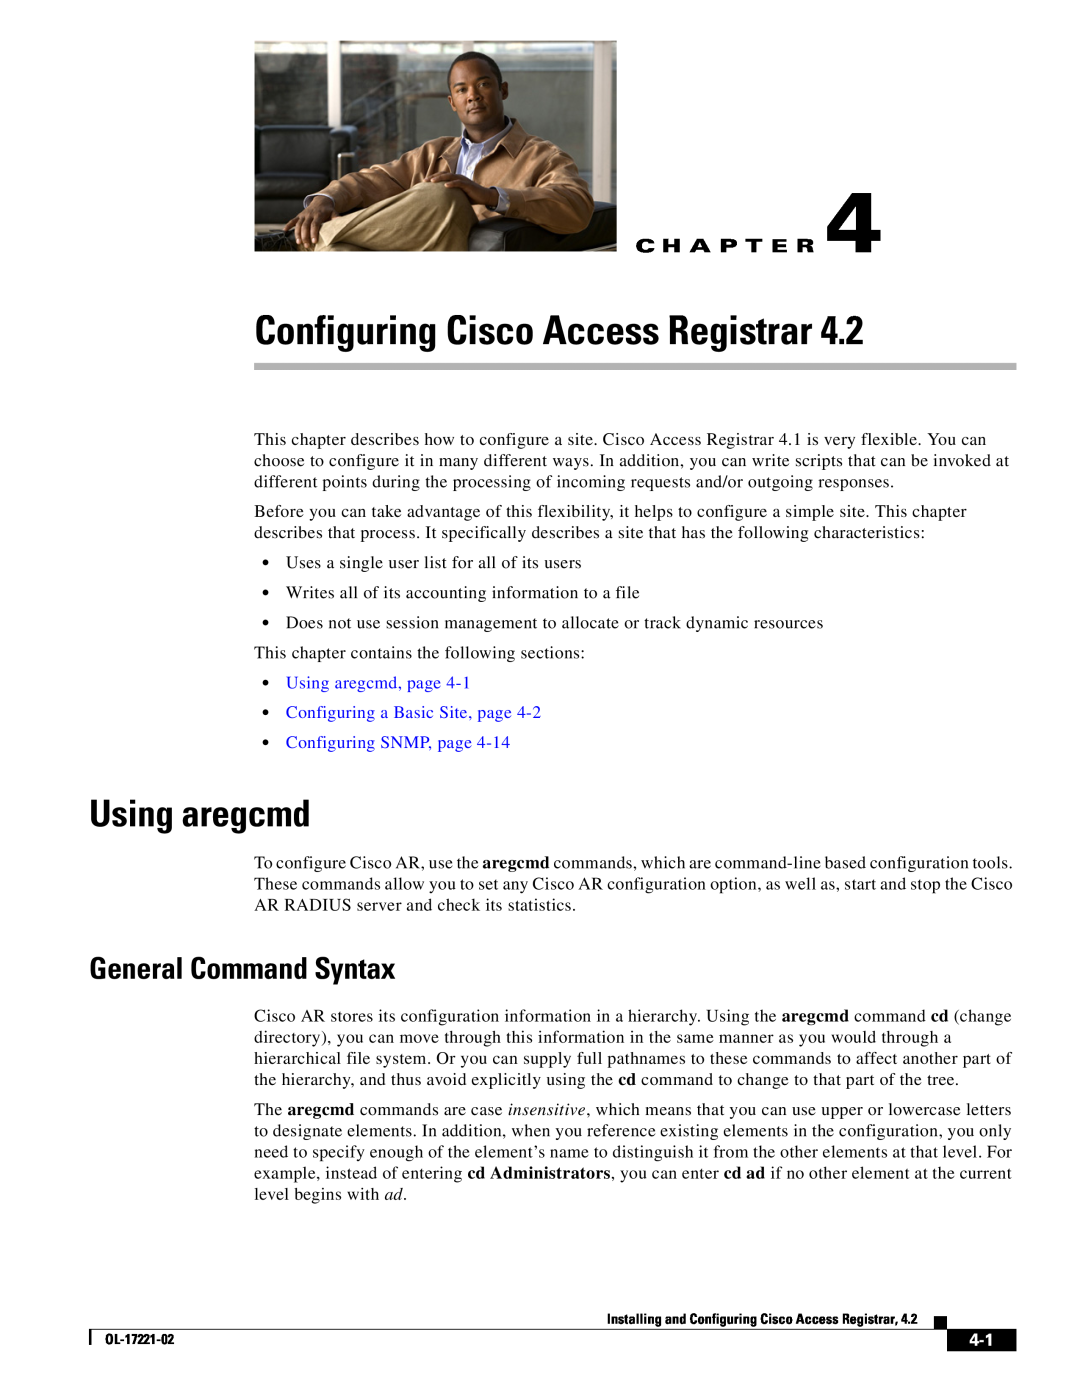 Cisco Systems 4.2 manual Configuring Cisco Access Registrar, Using aregcmd, General Command Syntax, Configuring SNMP, page 